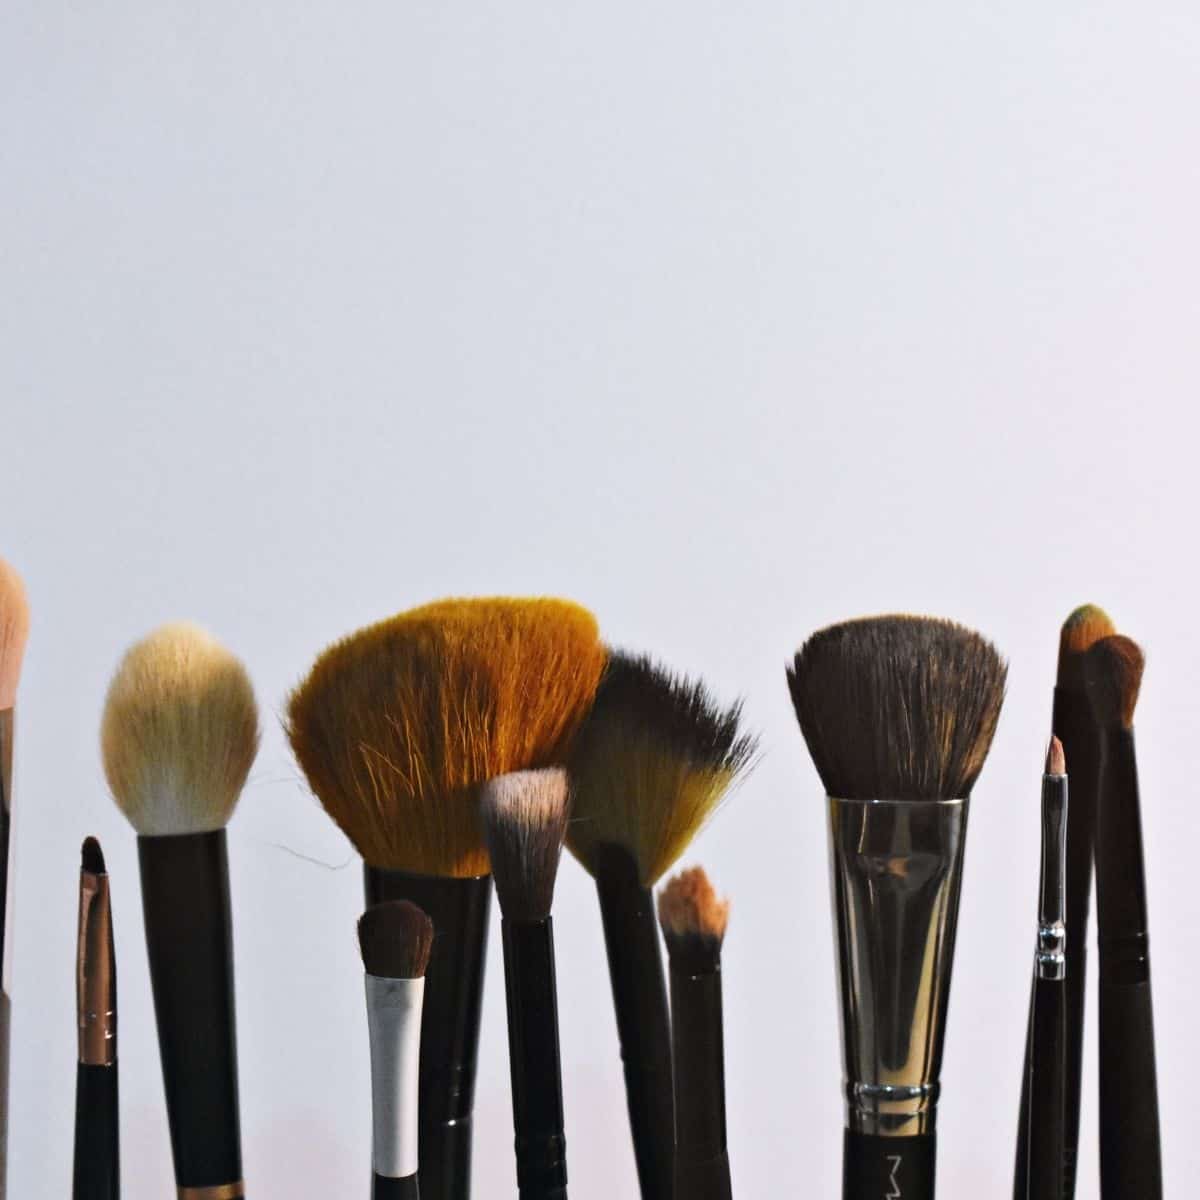 makeup brushes on a light background